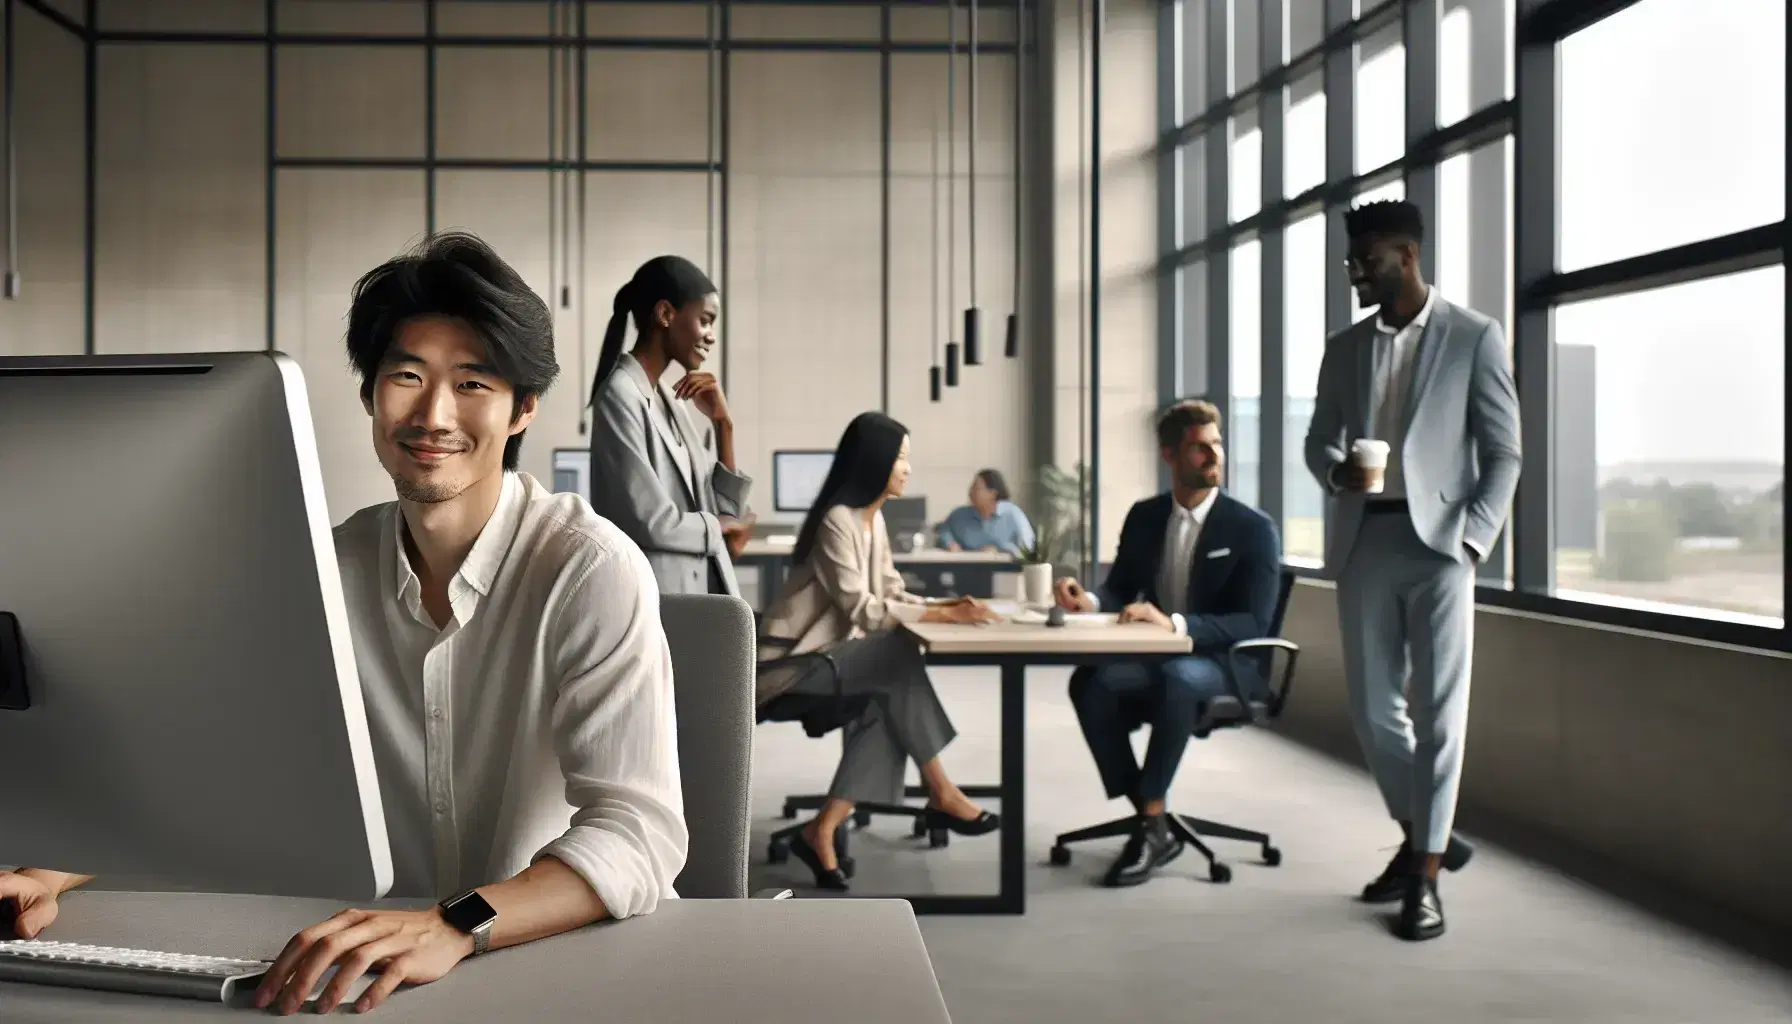 Diverse team in a modern office with an Asian man at a computer, a Black woman by the window with coffee, and colleagues discussing at a table.